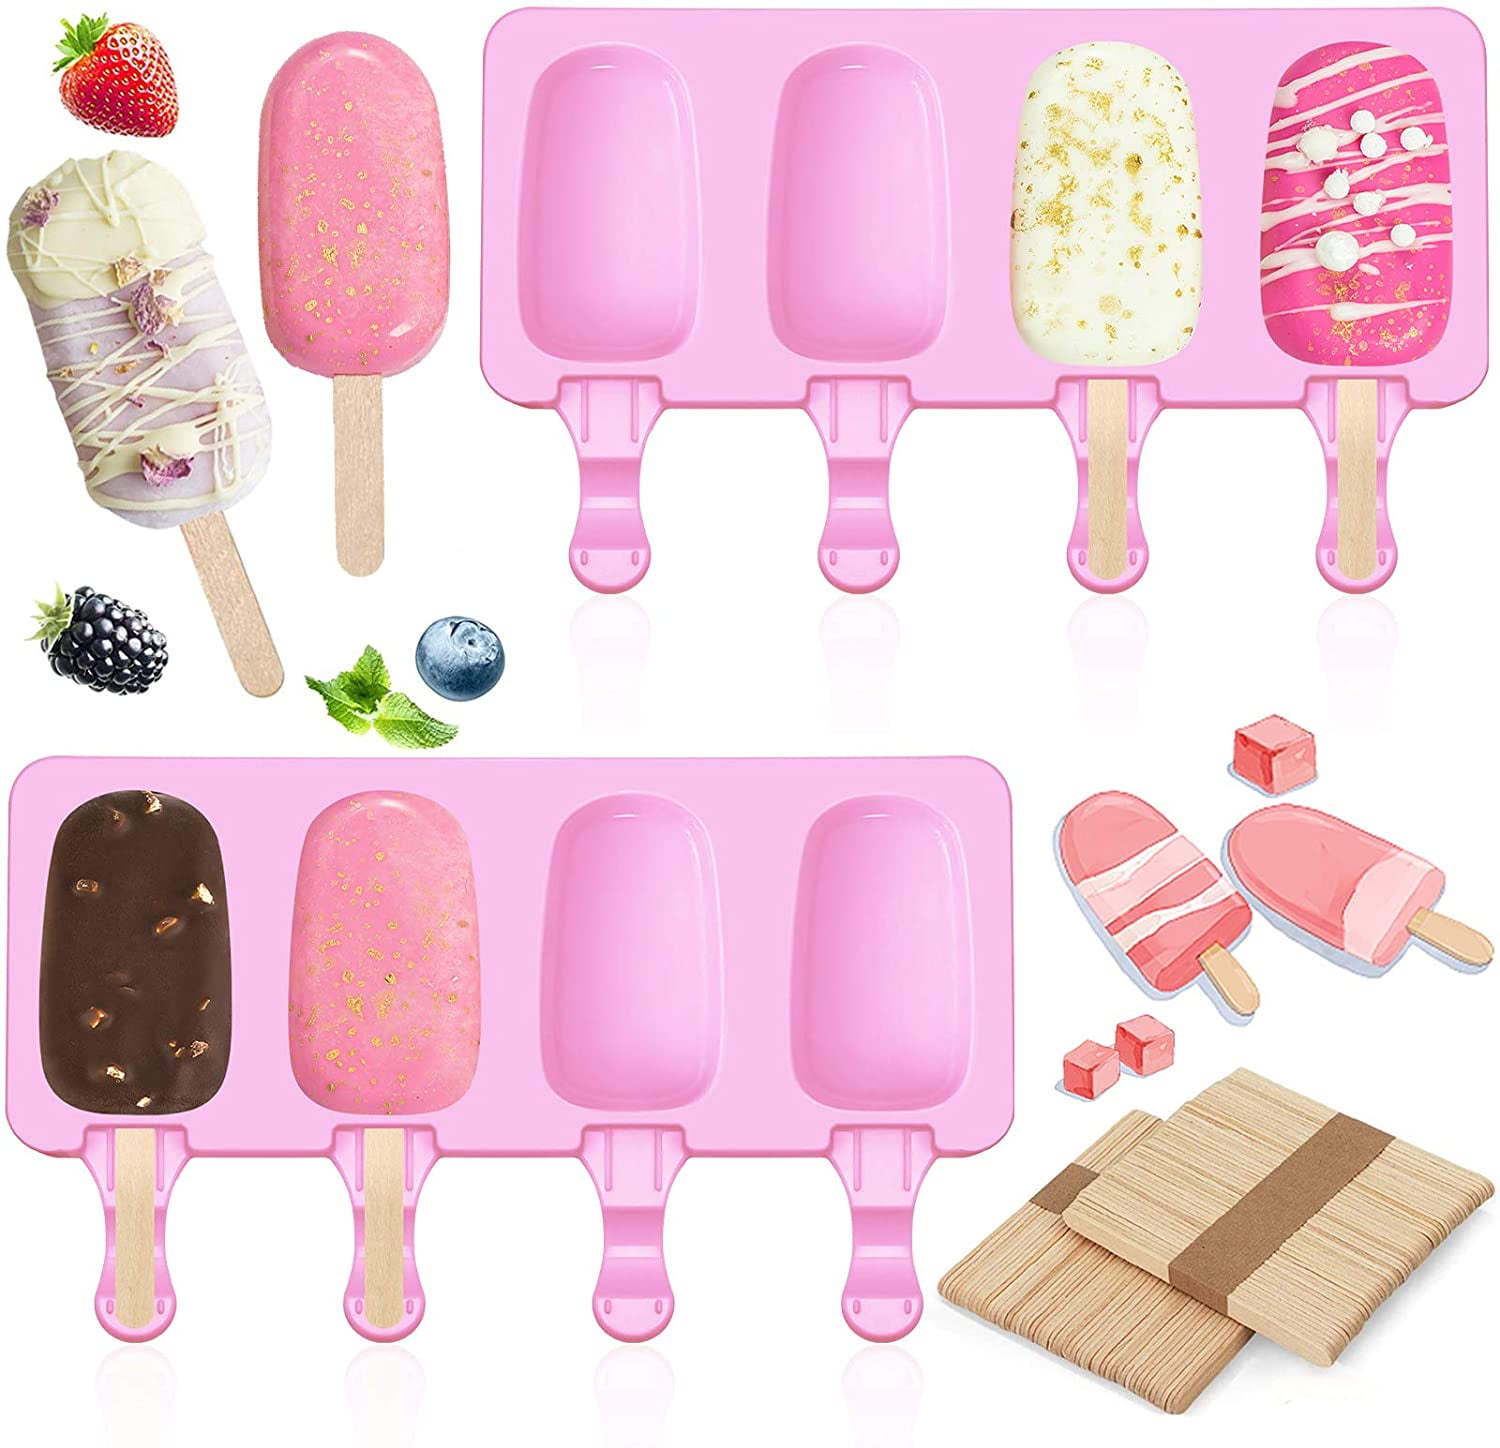 Maker With Sticks Oval Popsicle Moulds Food Silicone Molds Ice Cream Tools